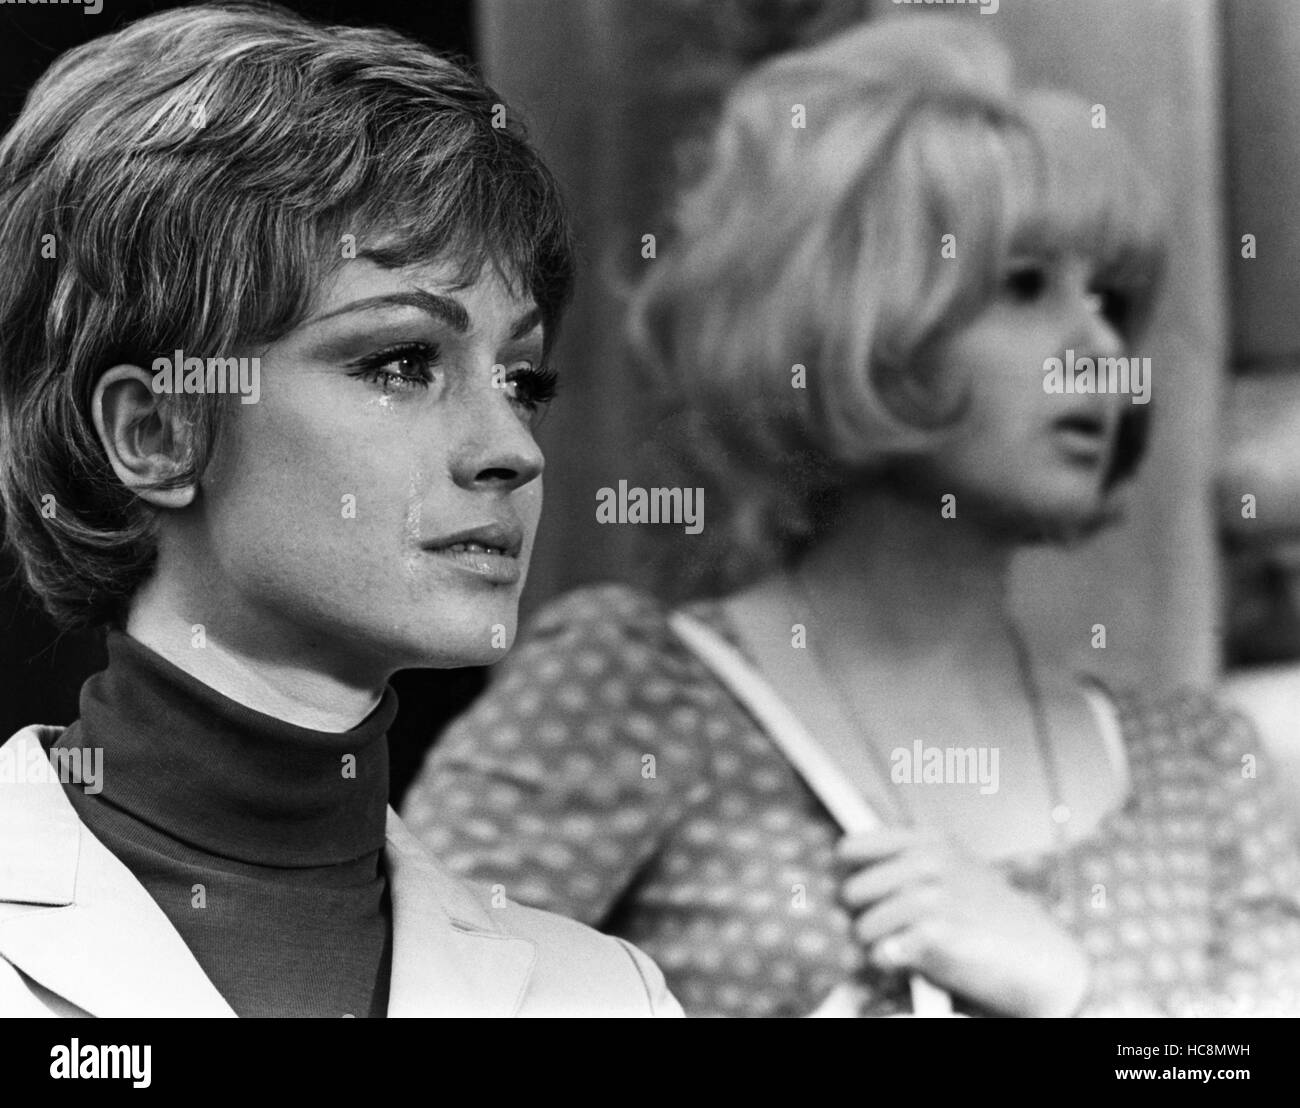 UP THE JUNCTION, Suzy Kendall, Adrienne Posta, 1967 Stock Photo - Alamy